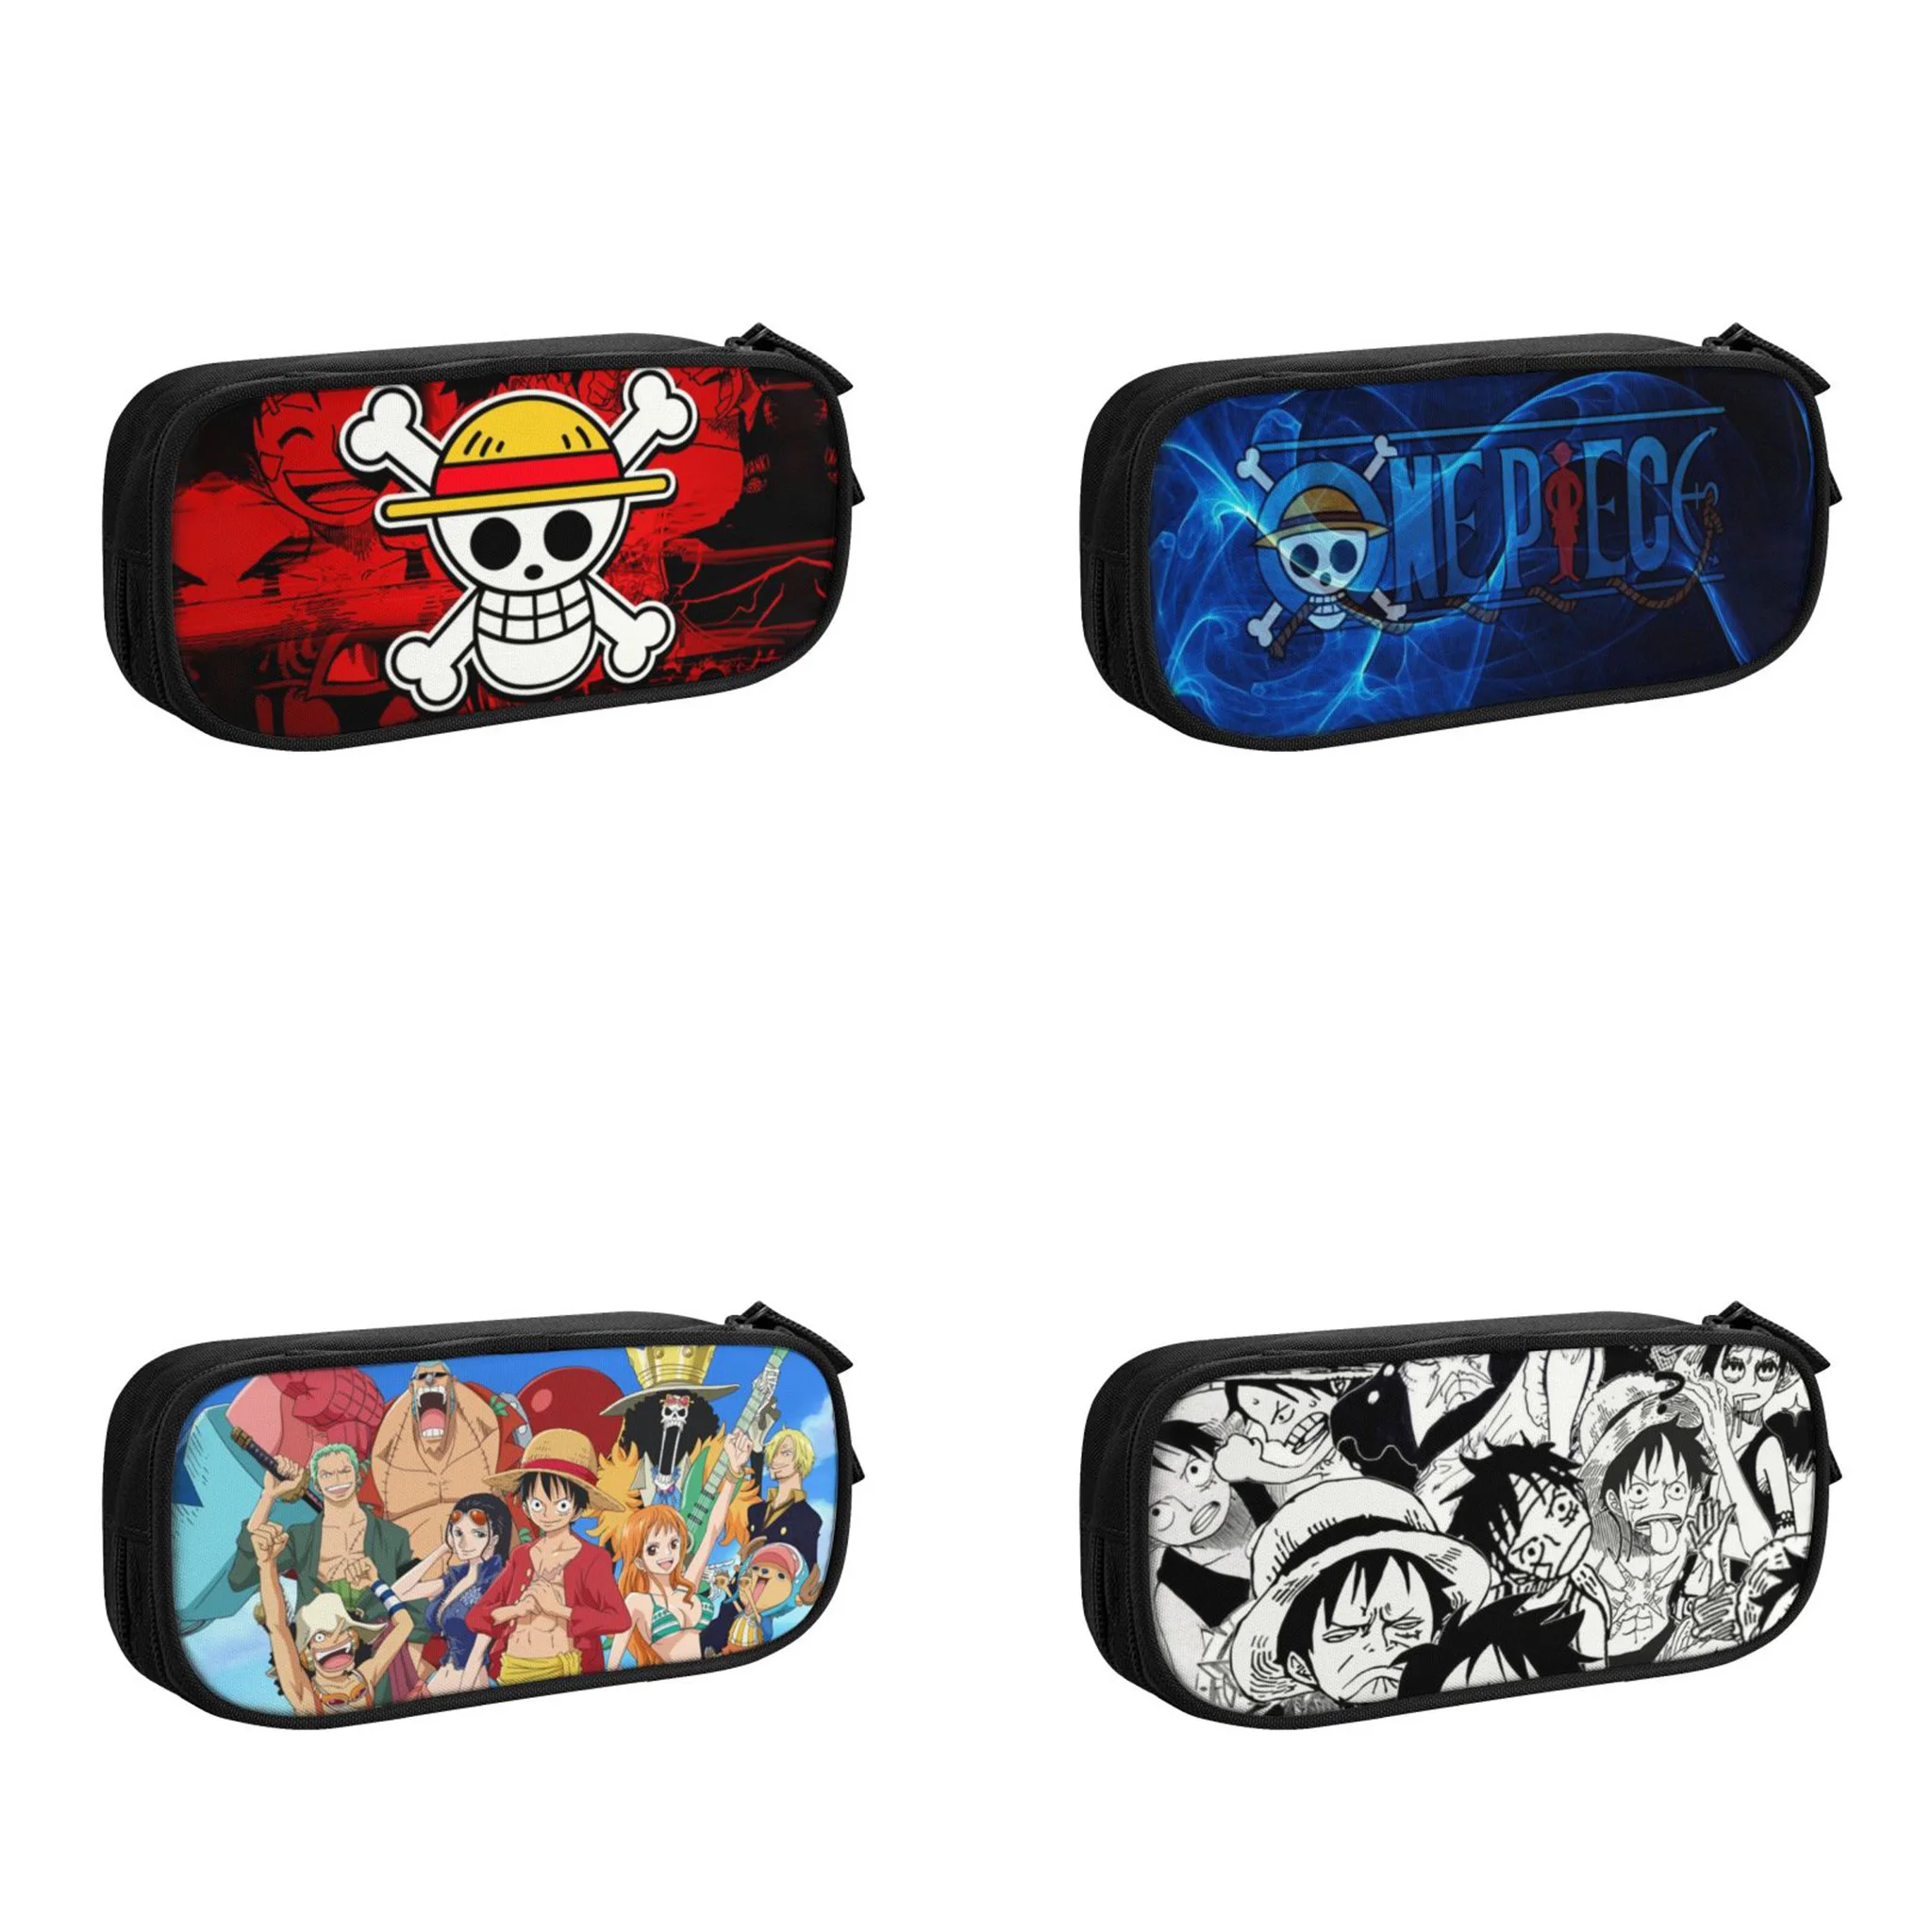 

Anime One Piece Anime Pencil Case for Boys Gilrs Custom Jolly Roger Pirates Skull Large Capacity Pen Bag Box School Accessories